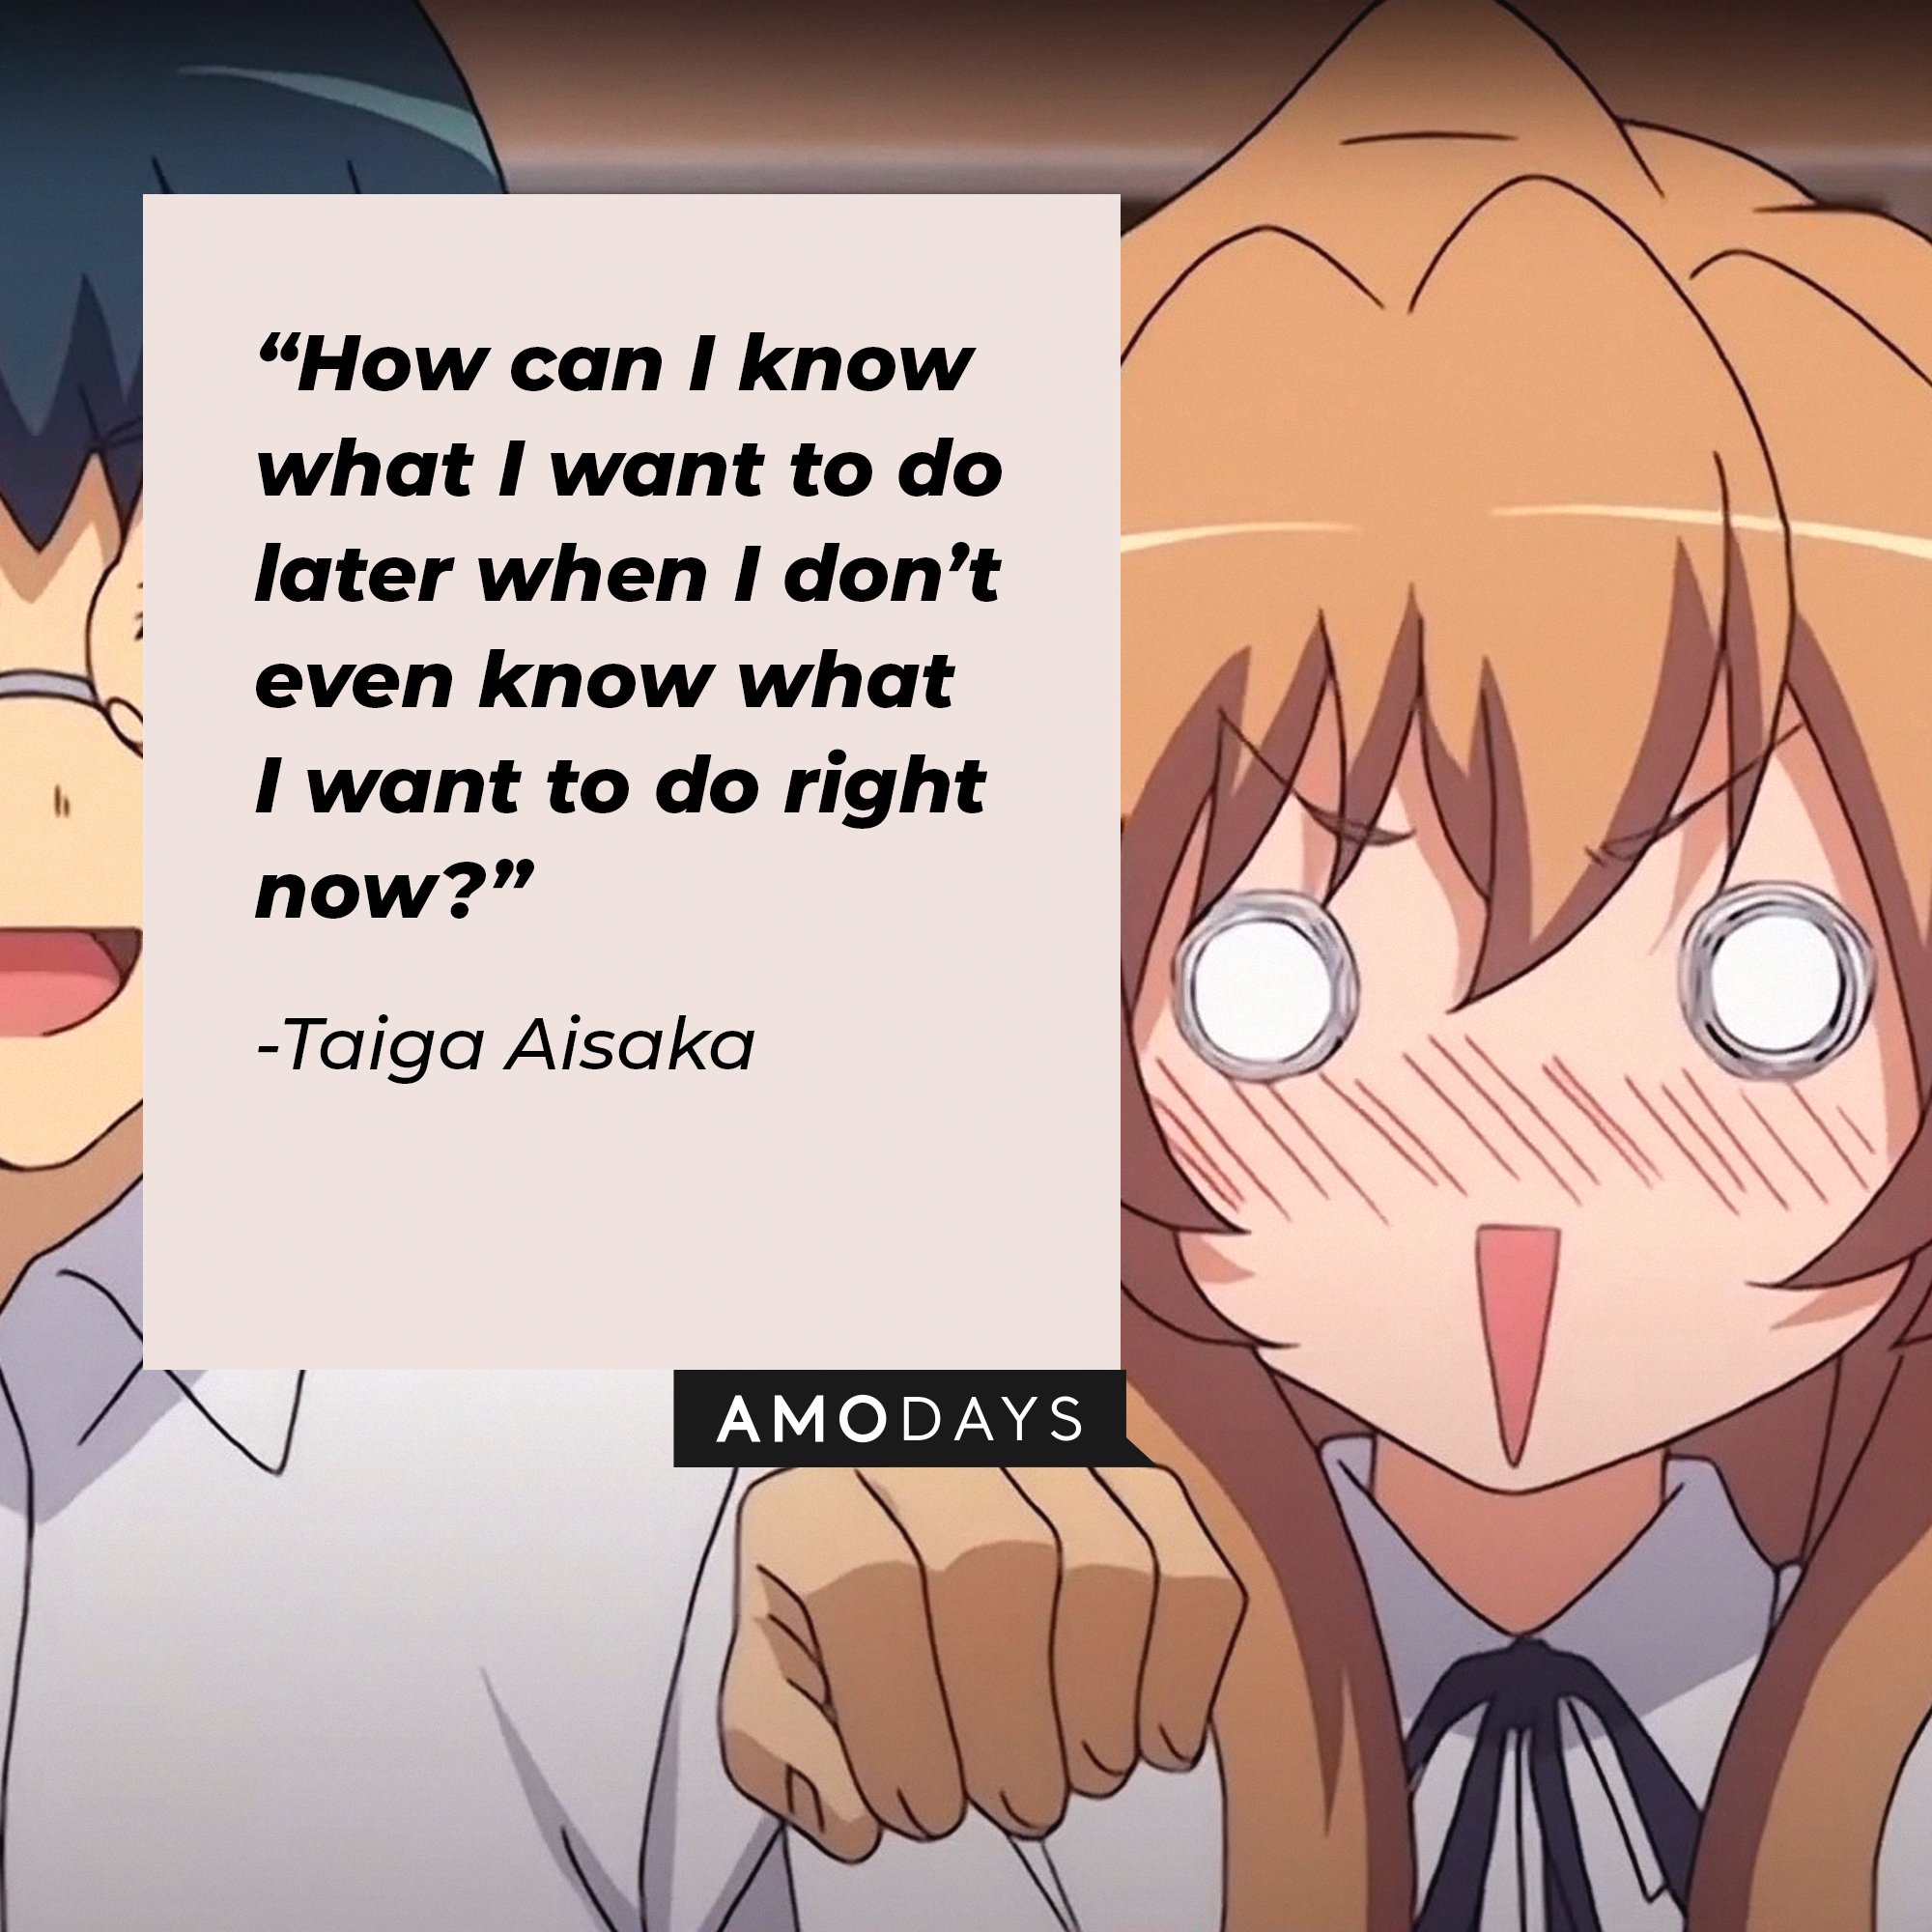 Taiga Aisaka’s quote: “How can I know what I want to do later when I don’t even know what I want to do right now?”| Image: AmoDays